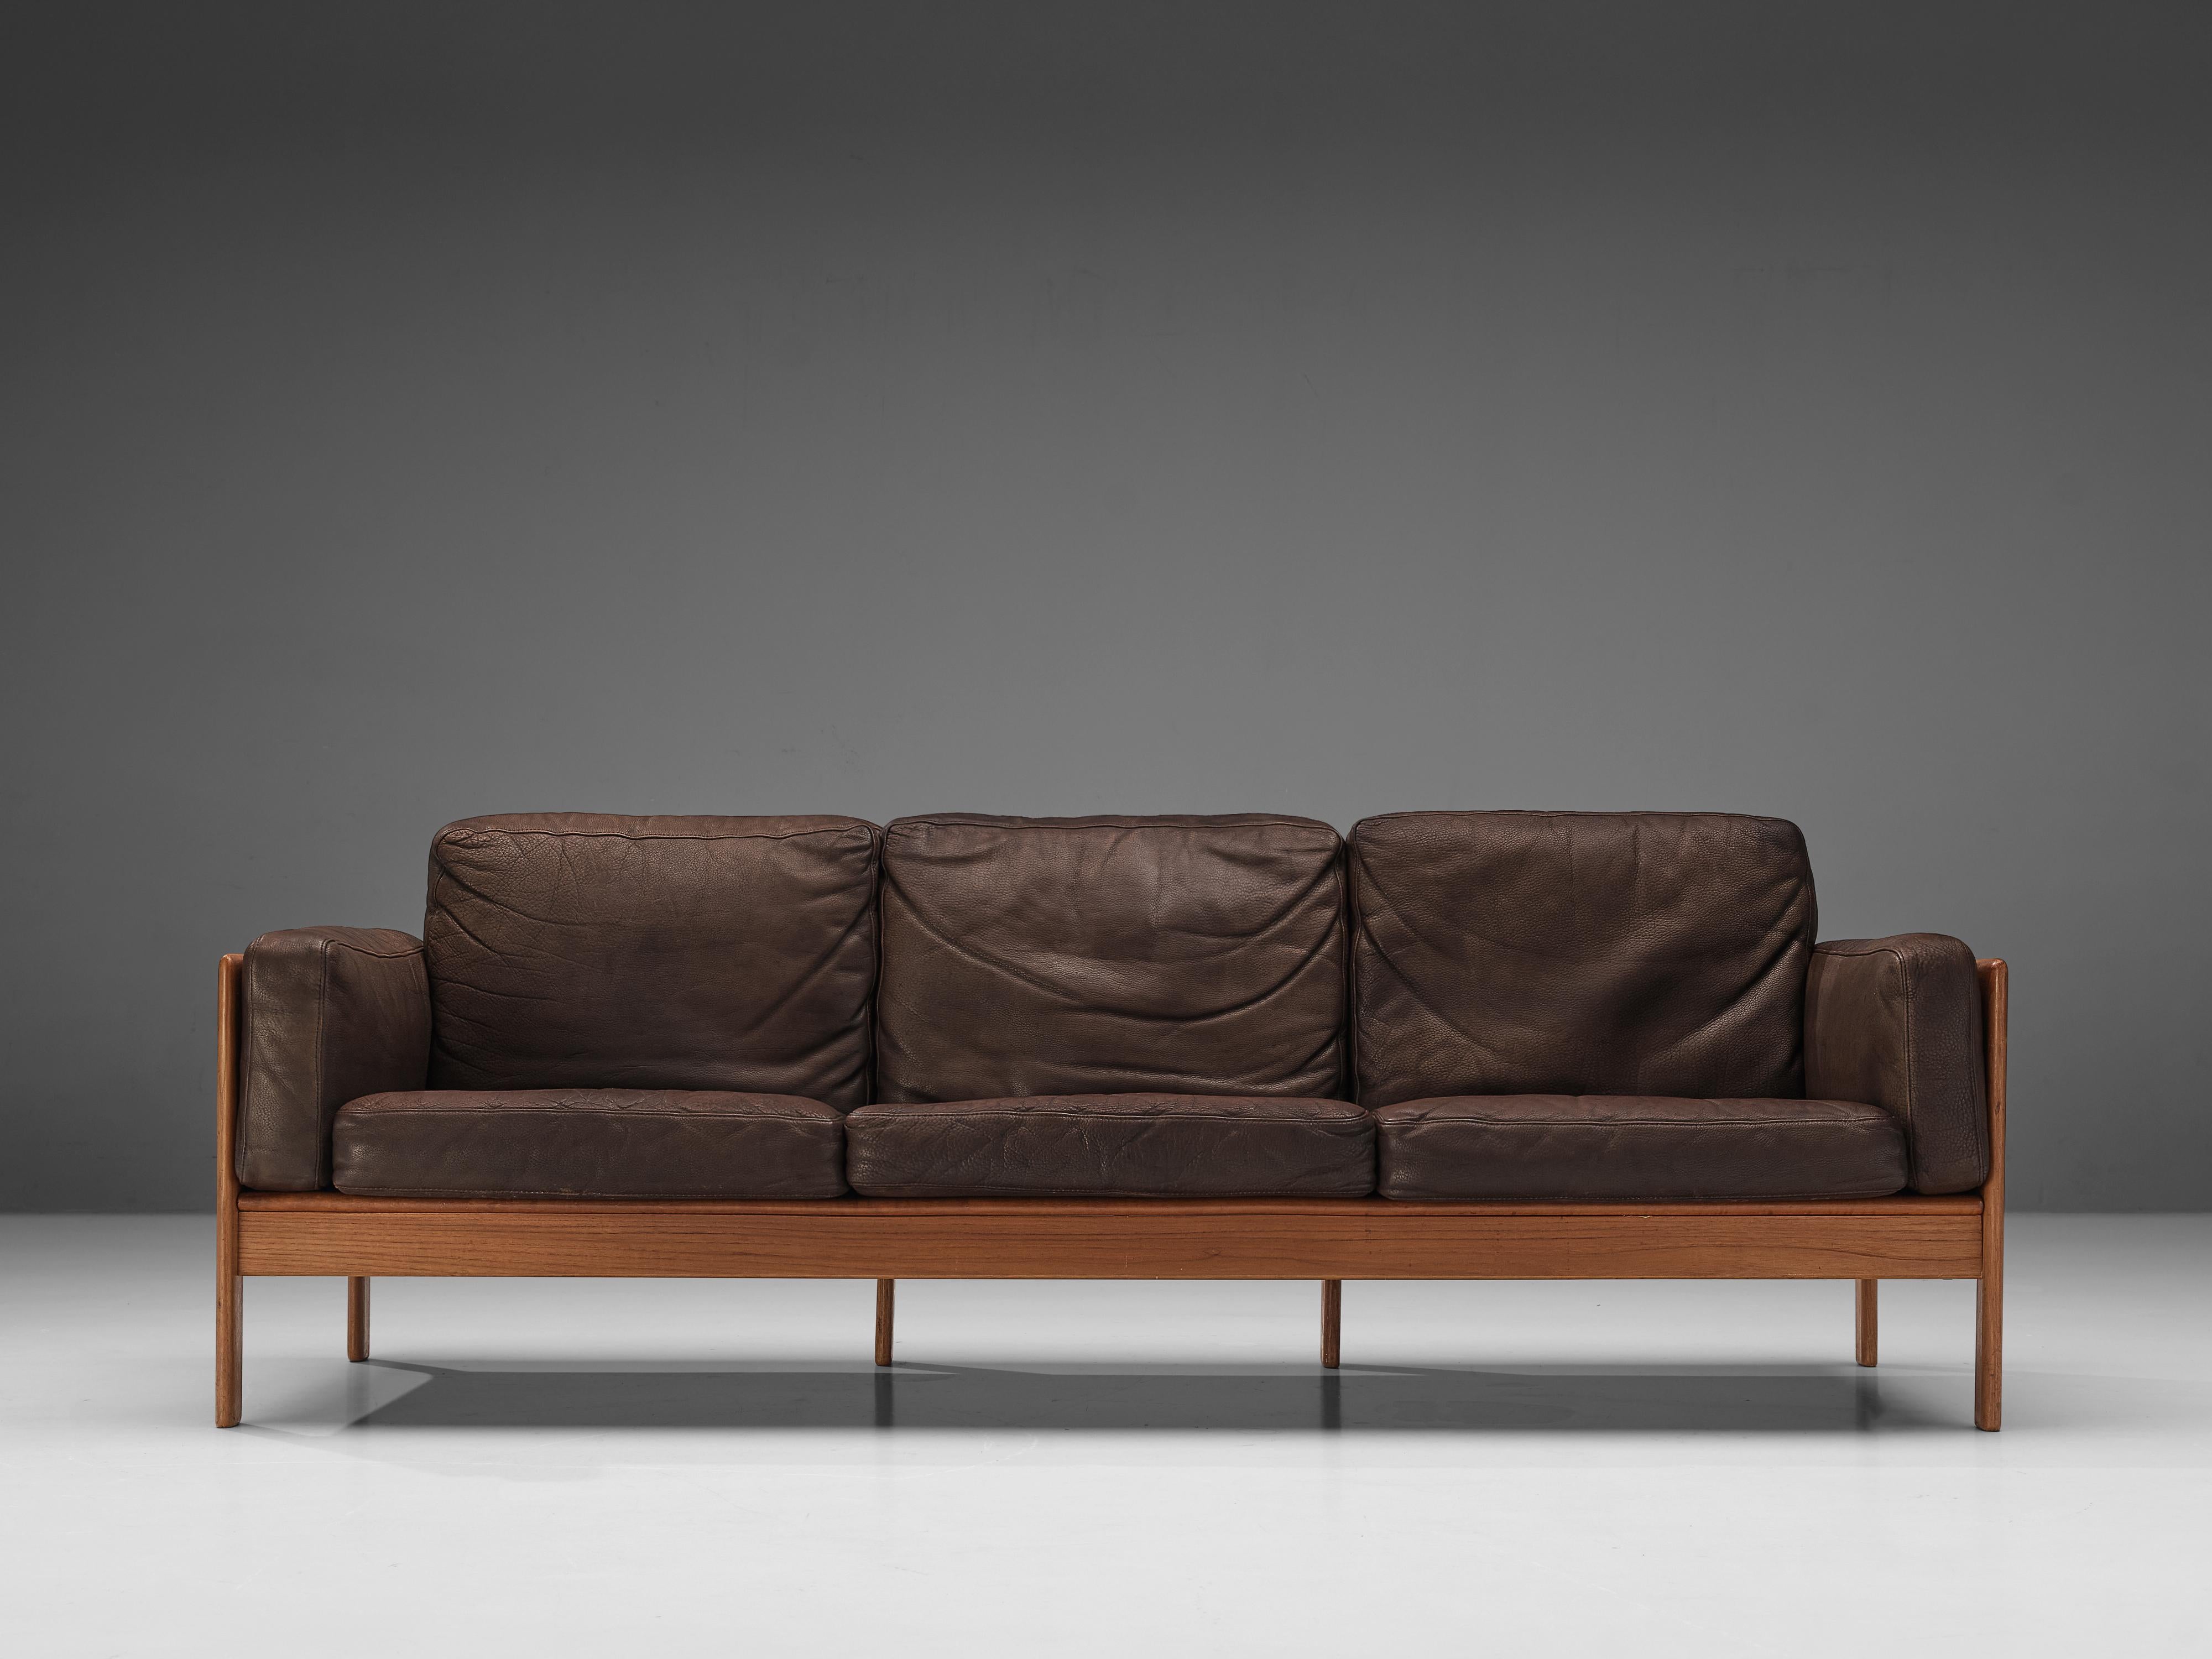 Stained Elegant Danish Sofa in Brown Leather